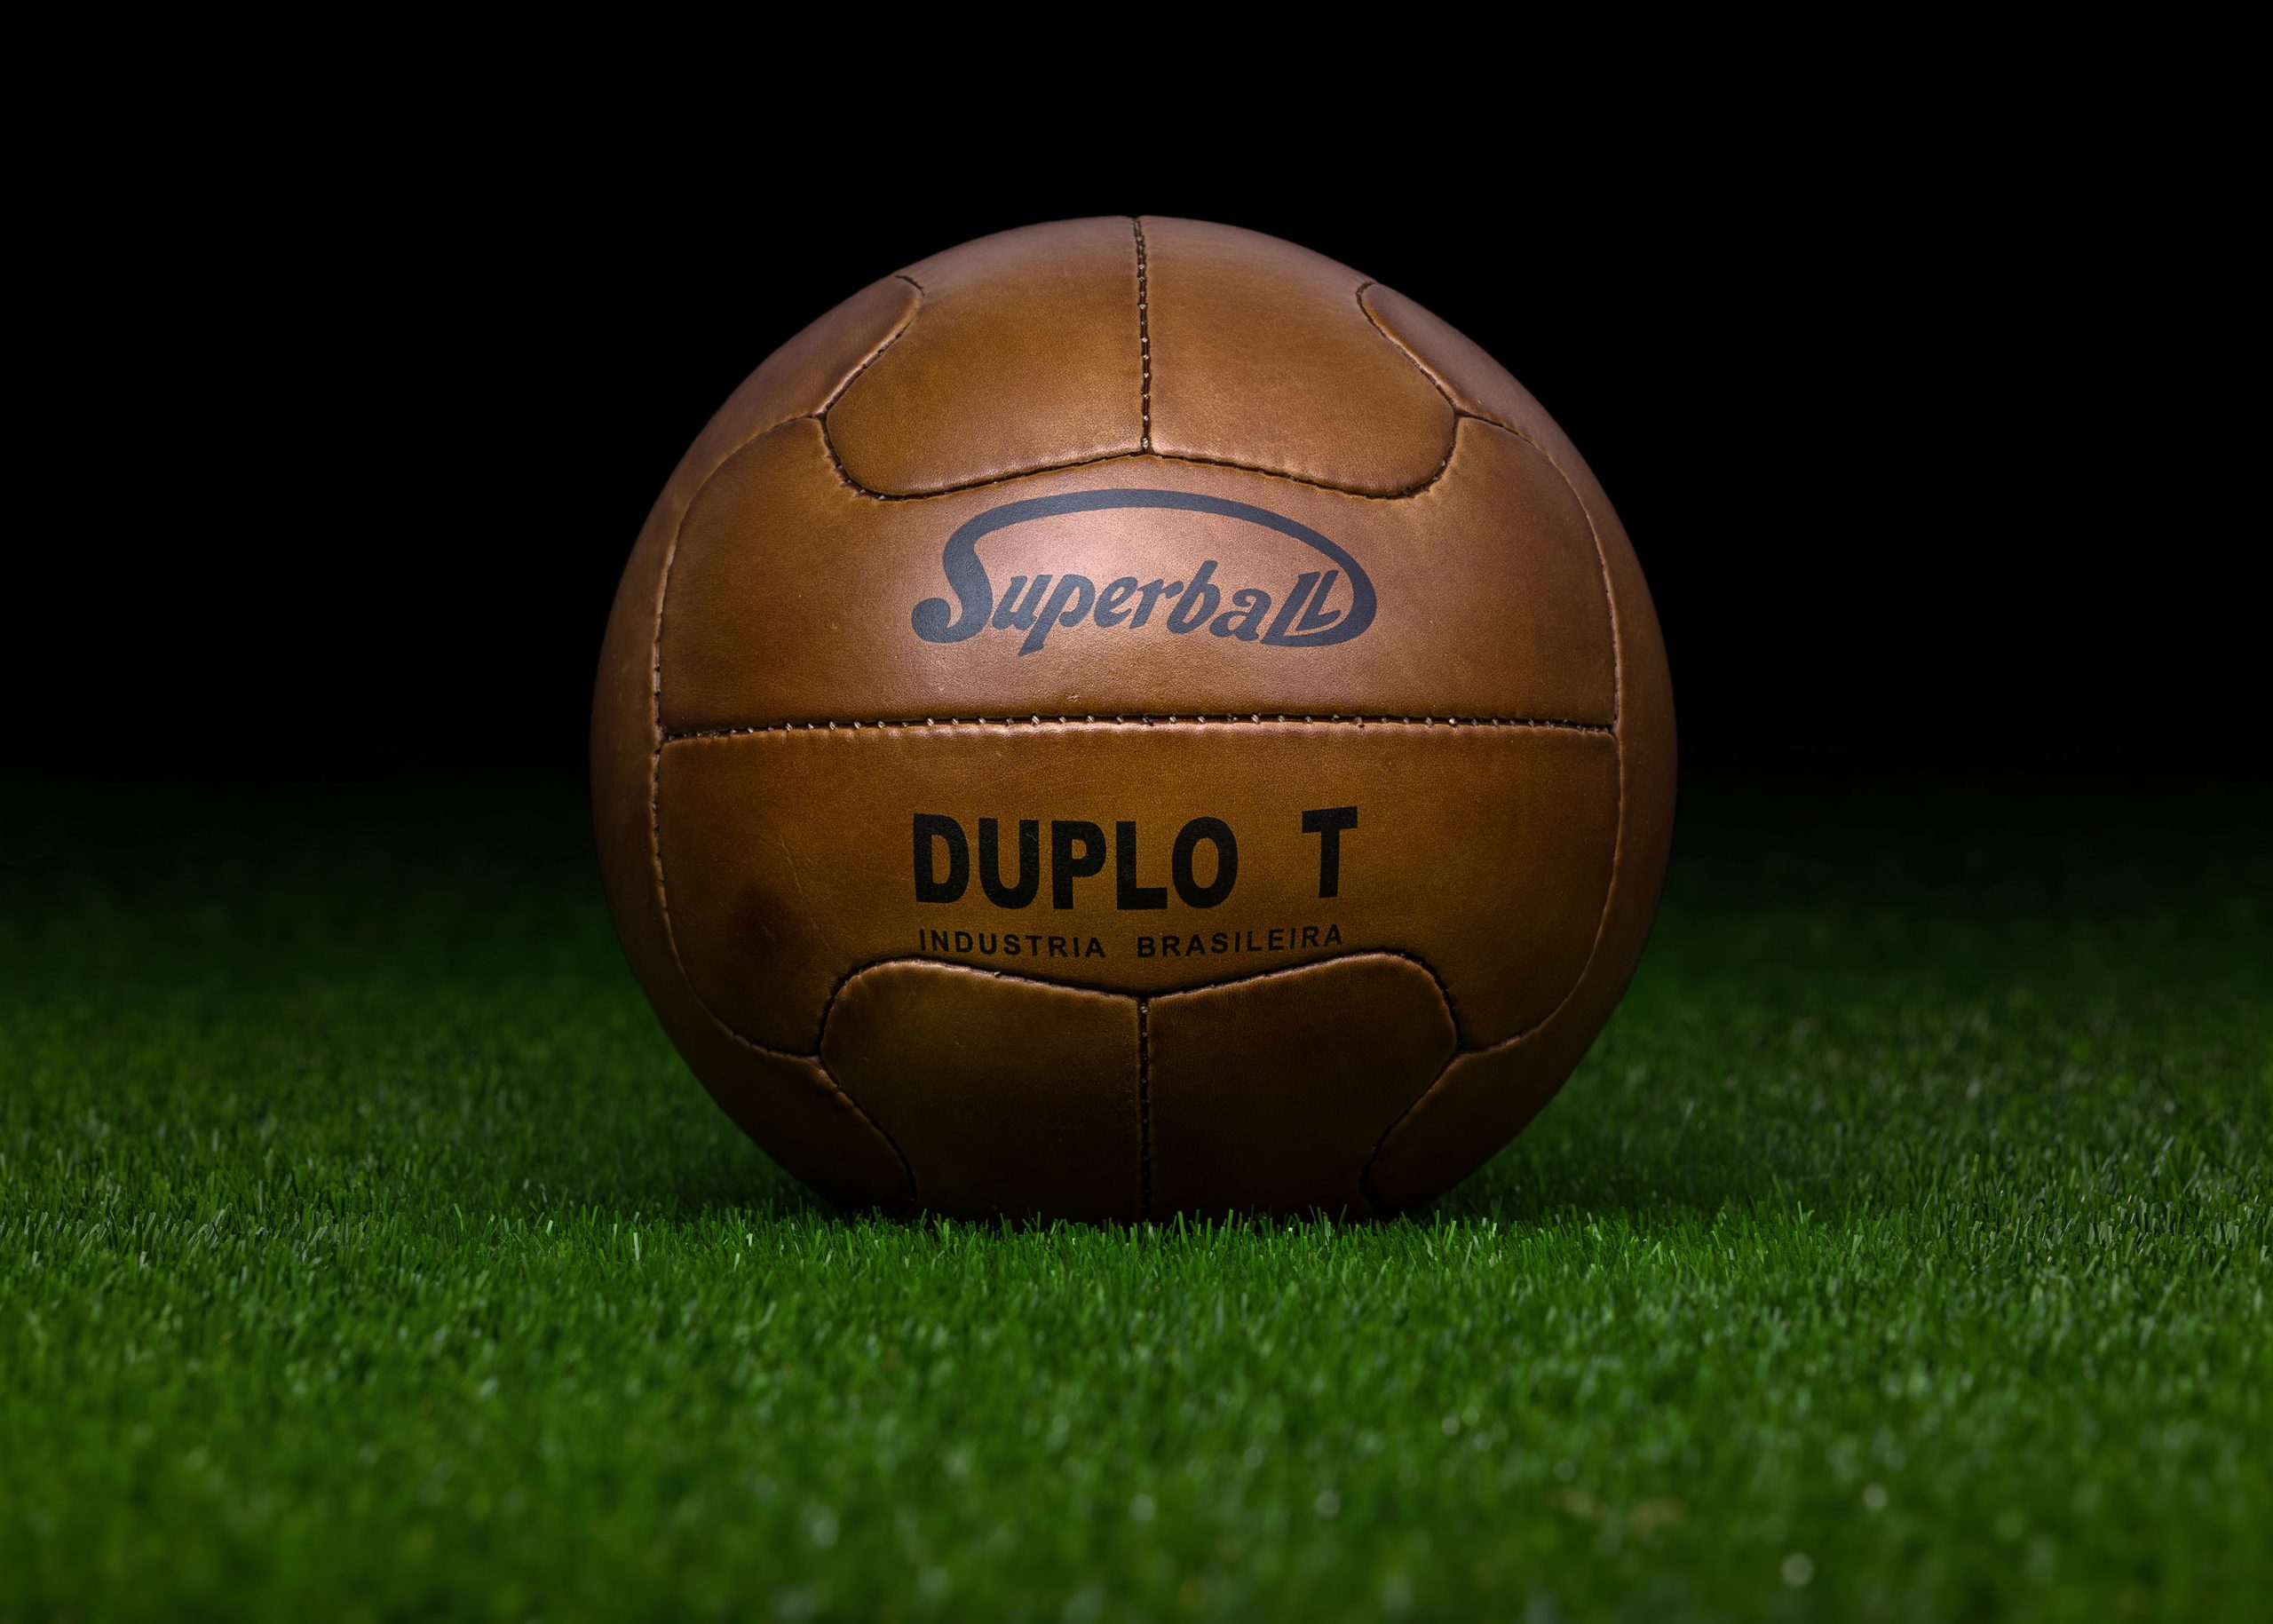 FIFA World Cup Duplo T